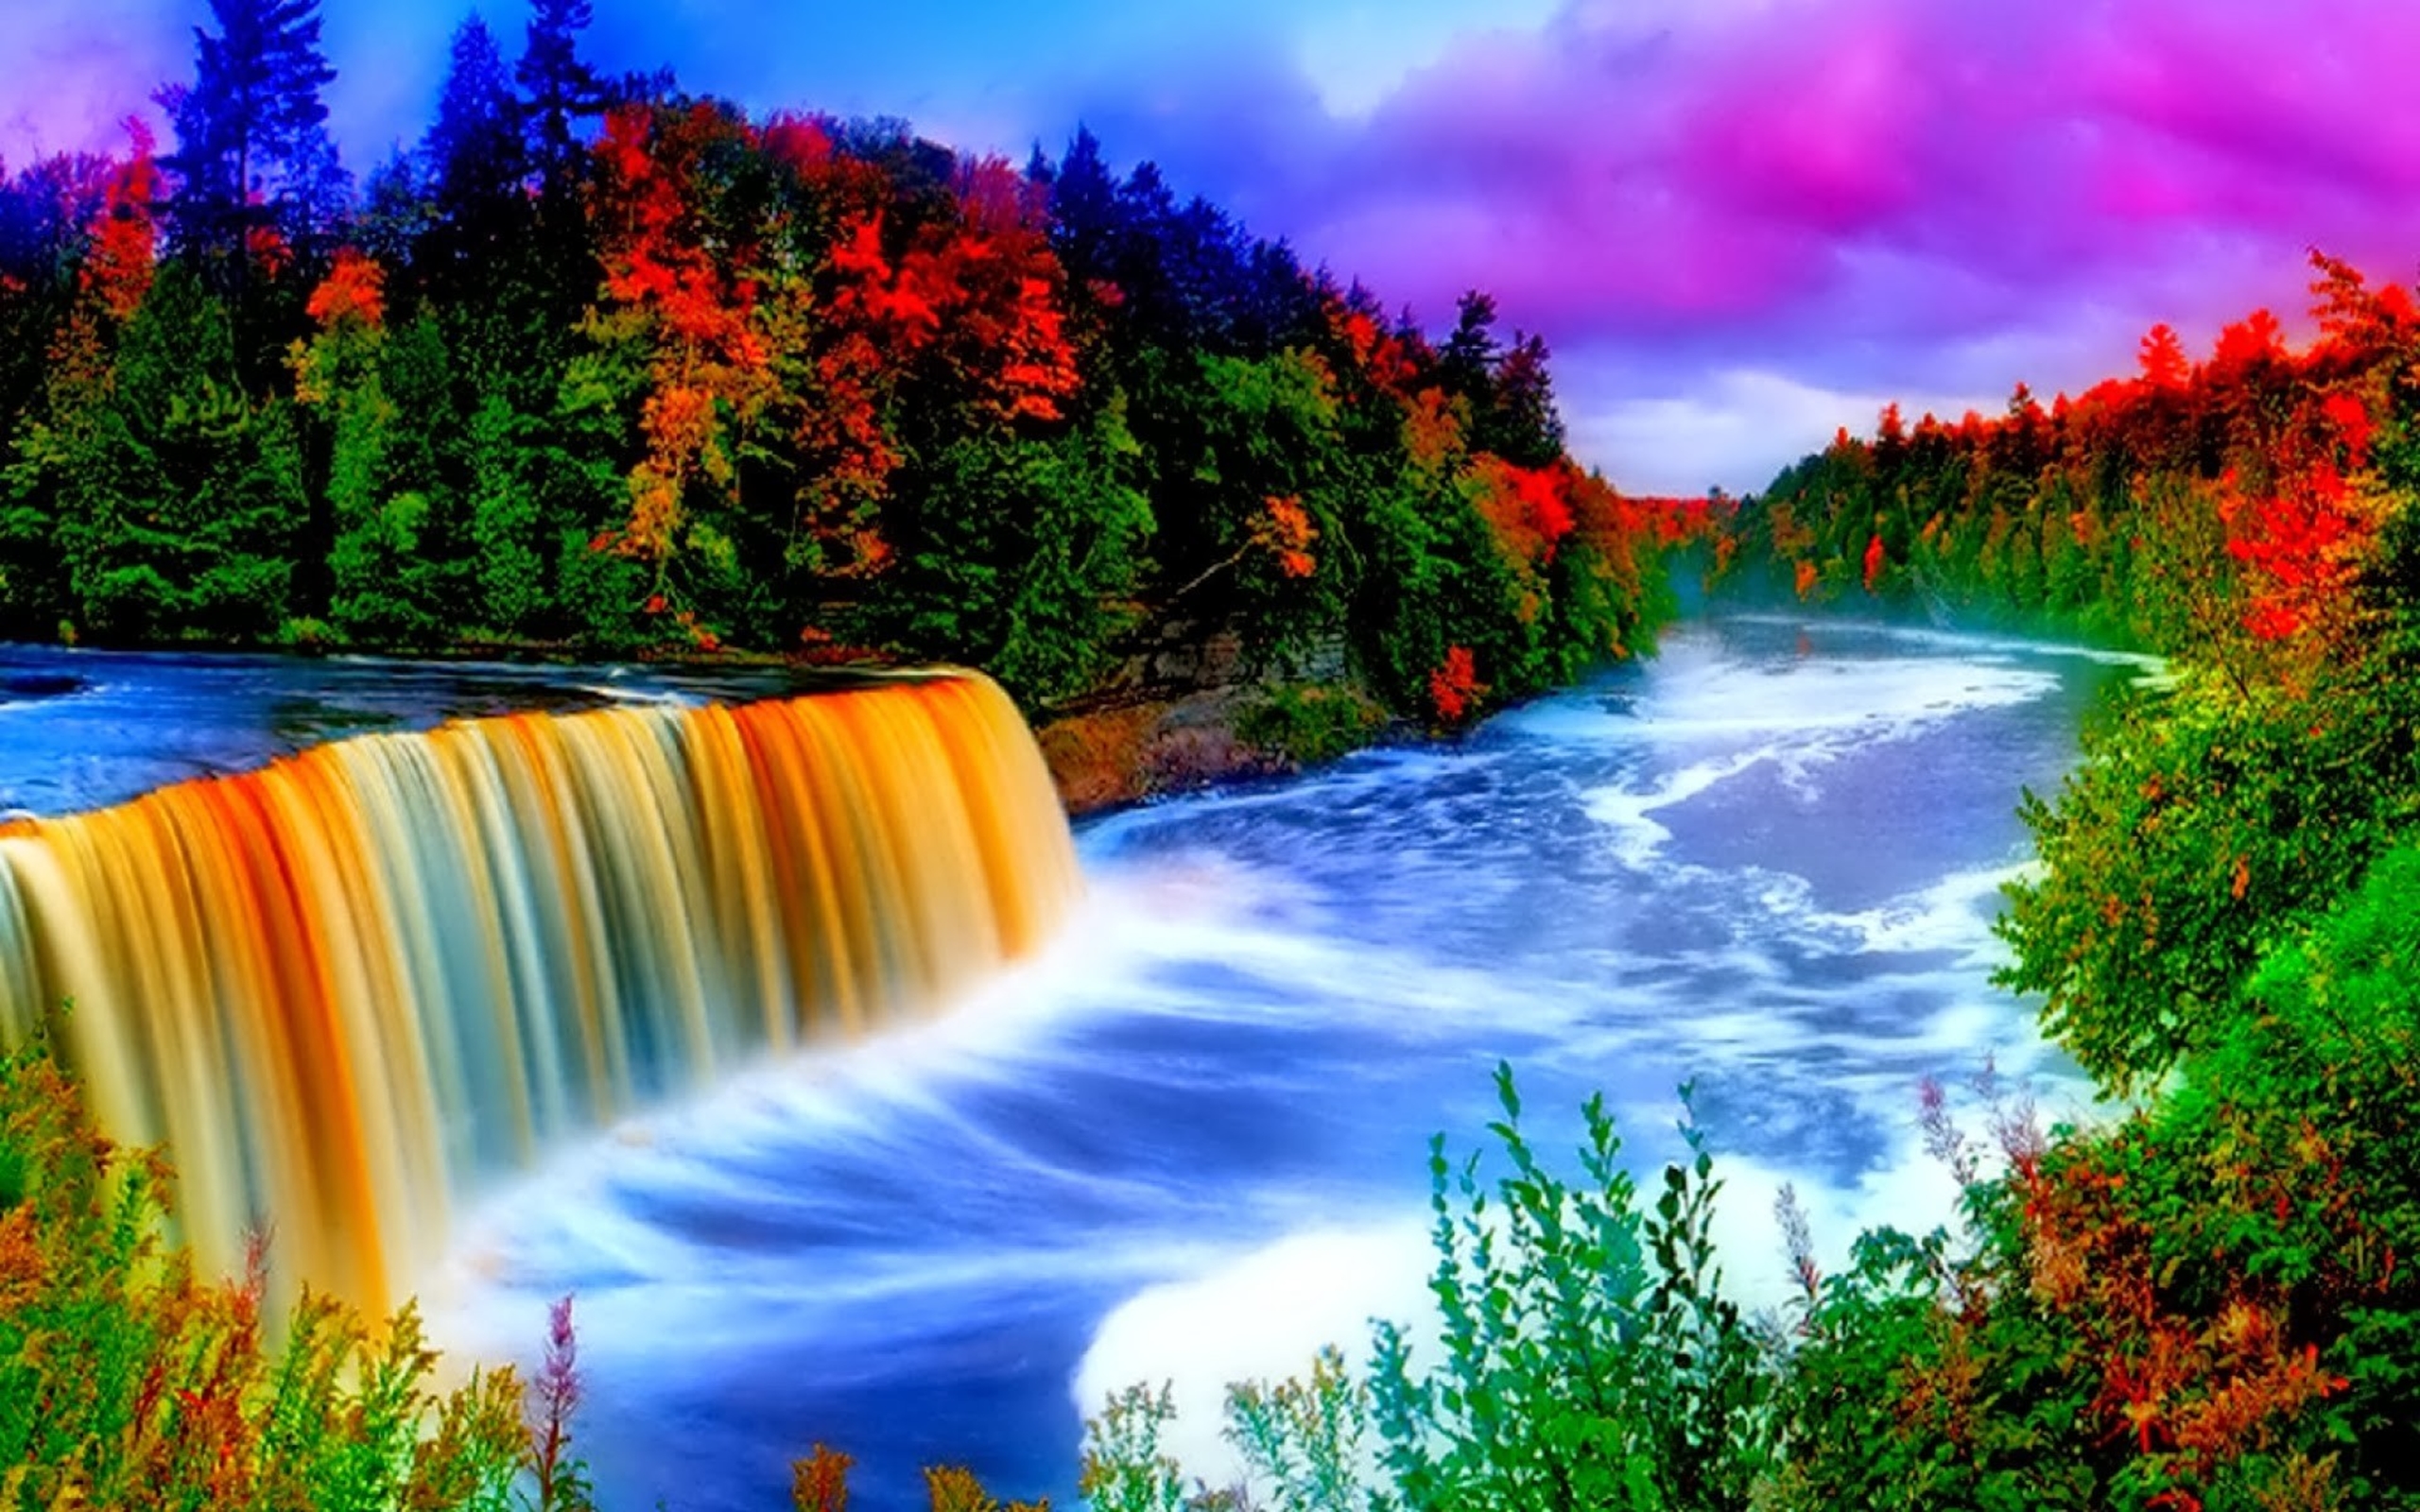 Wallpaper Water Falls Surrounded by Trees Under Blue Sky, Background -  Download Free Image